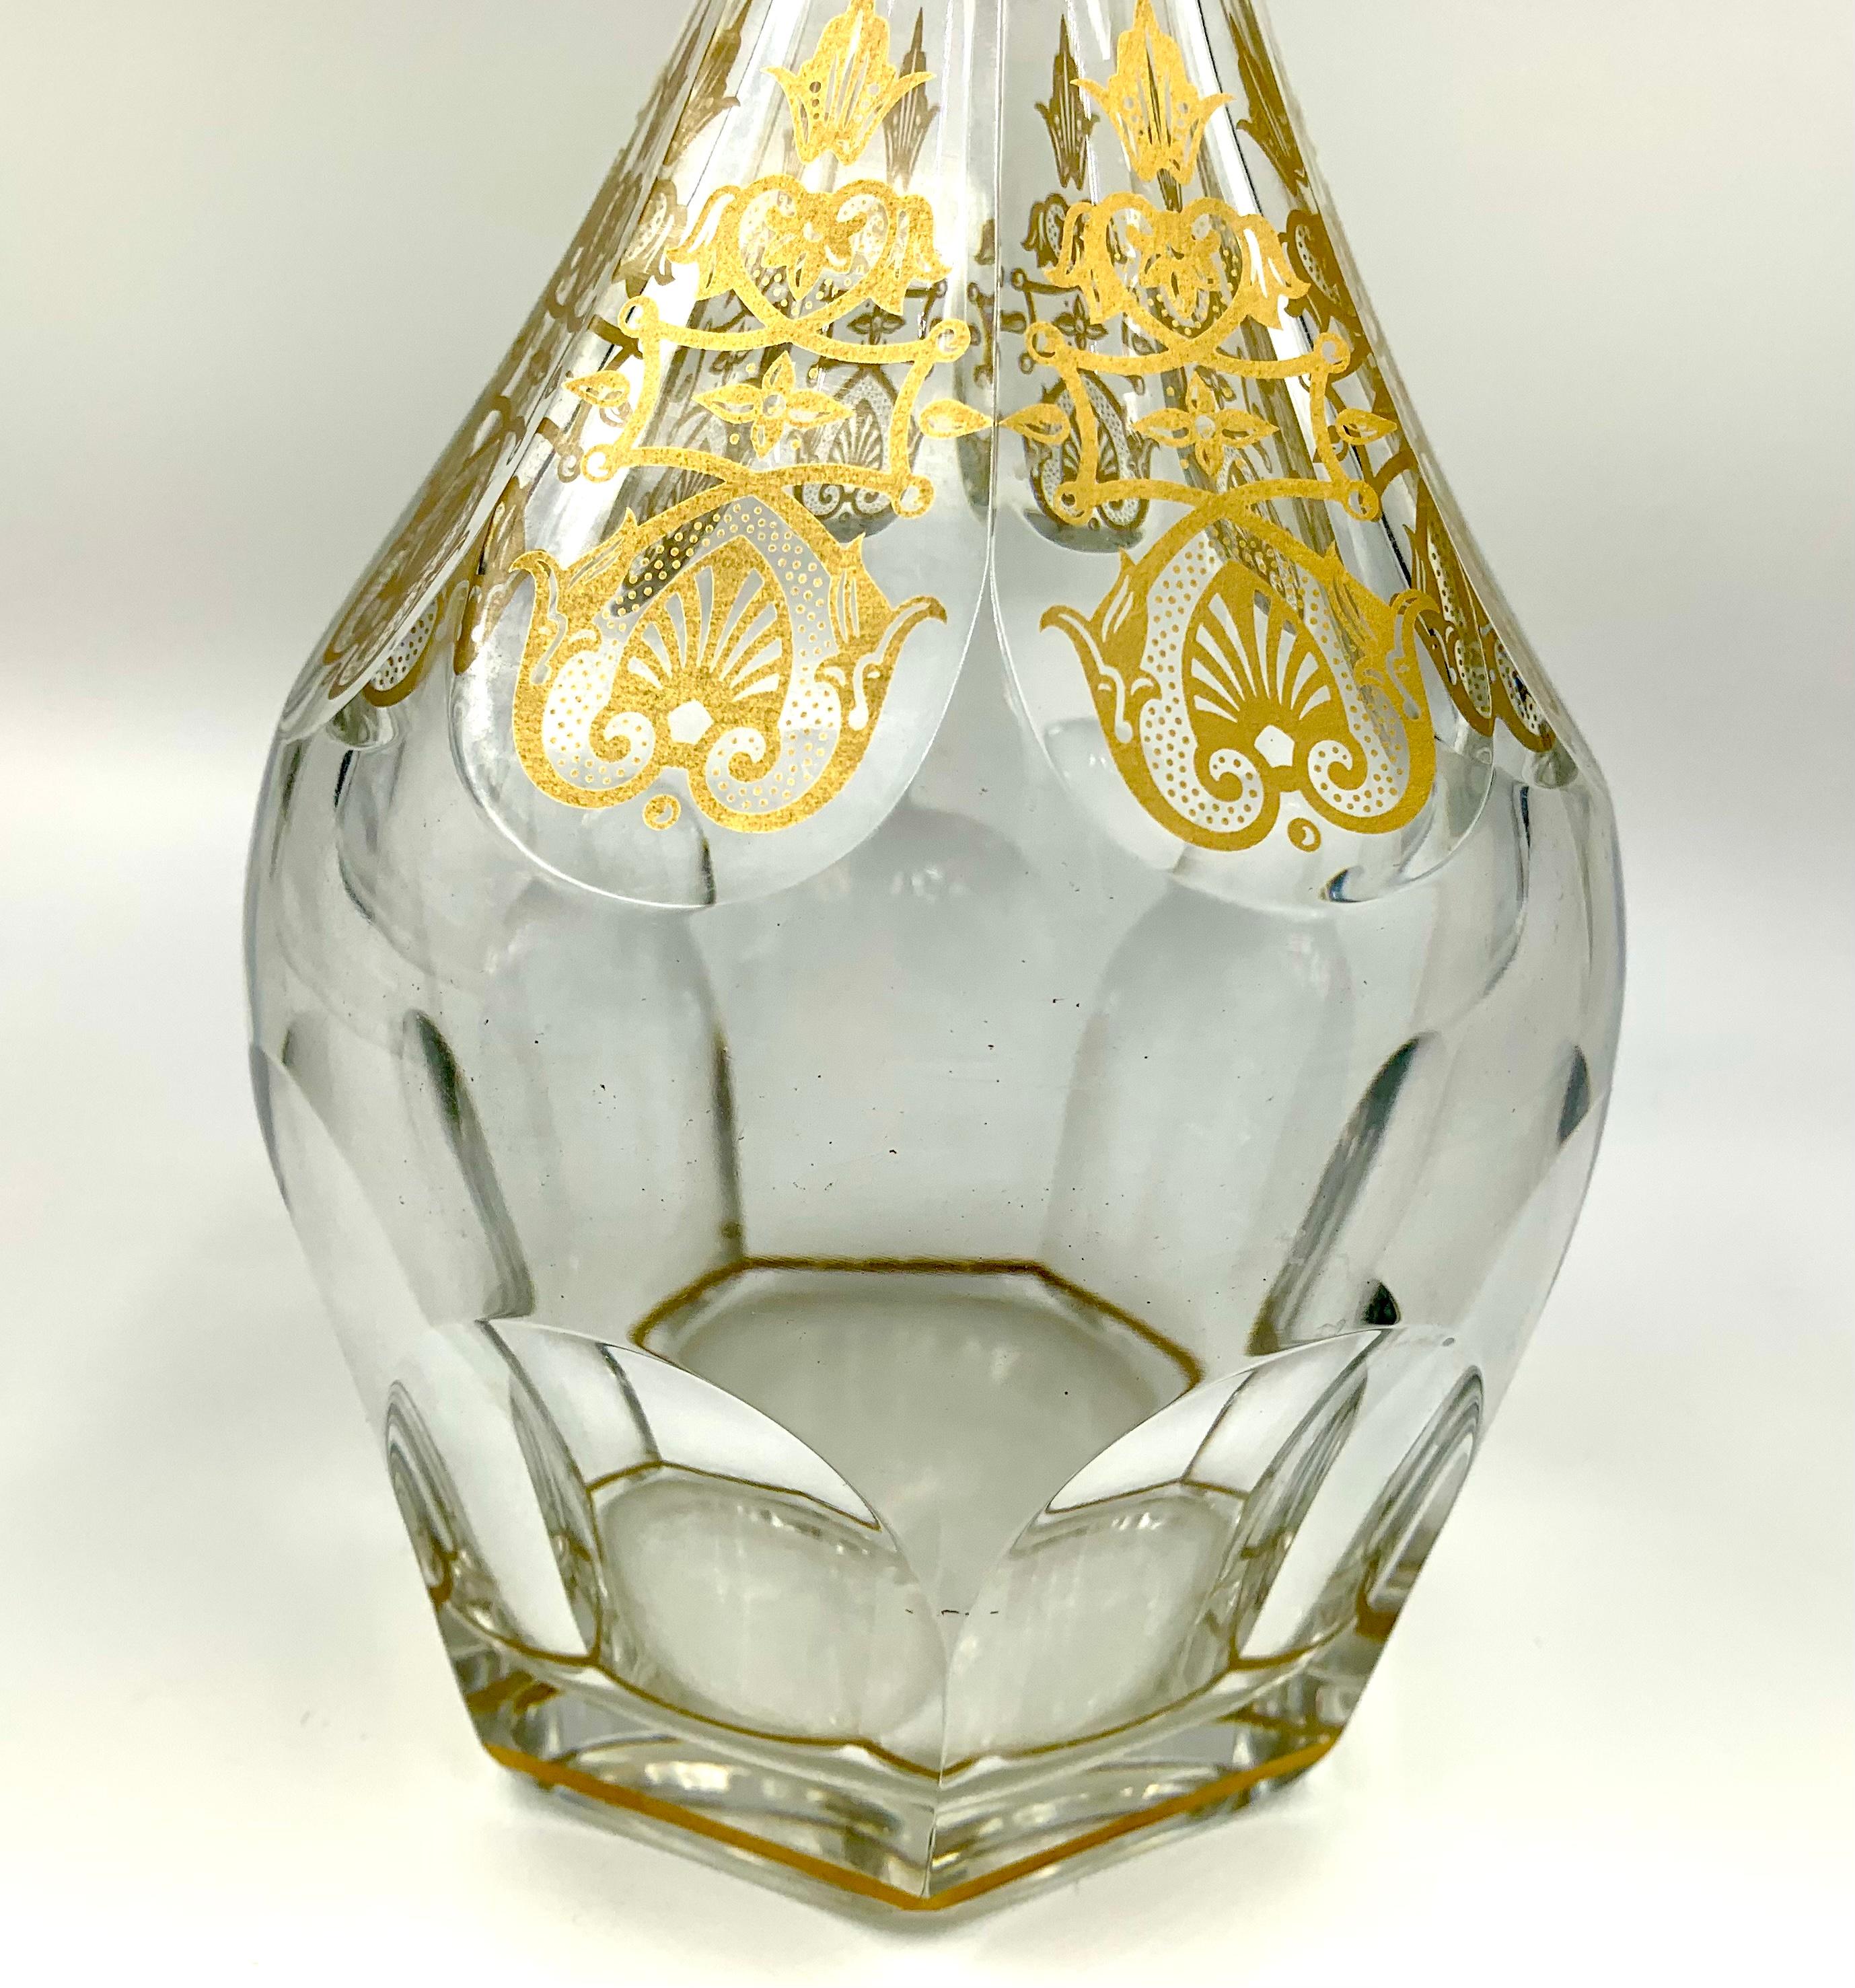 French Baccarat Harcourt Empire 1841 Decanter